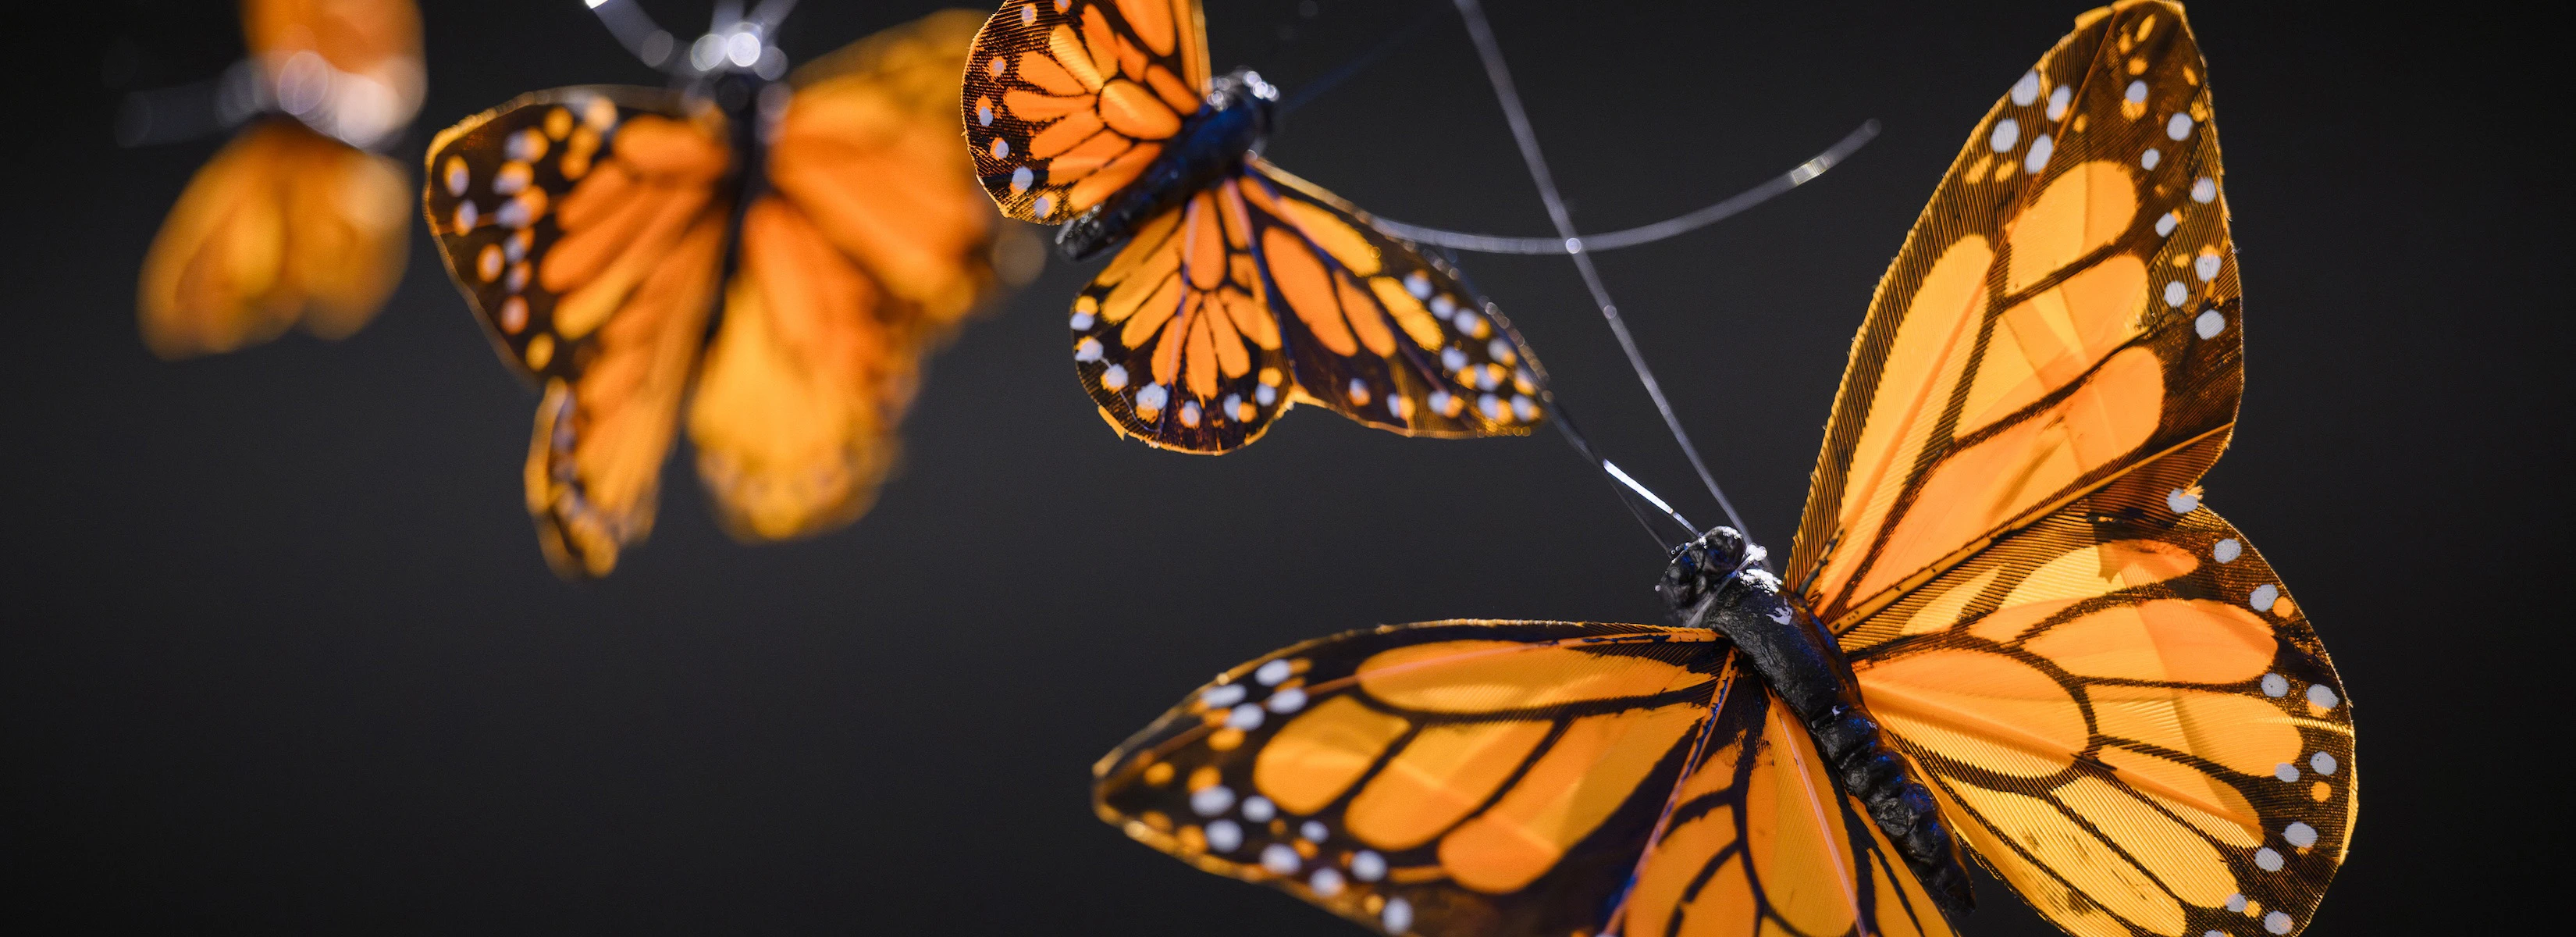 decorative plastic monarch butterflies are suspended in air